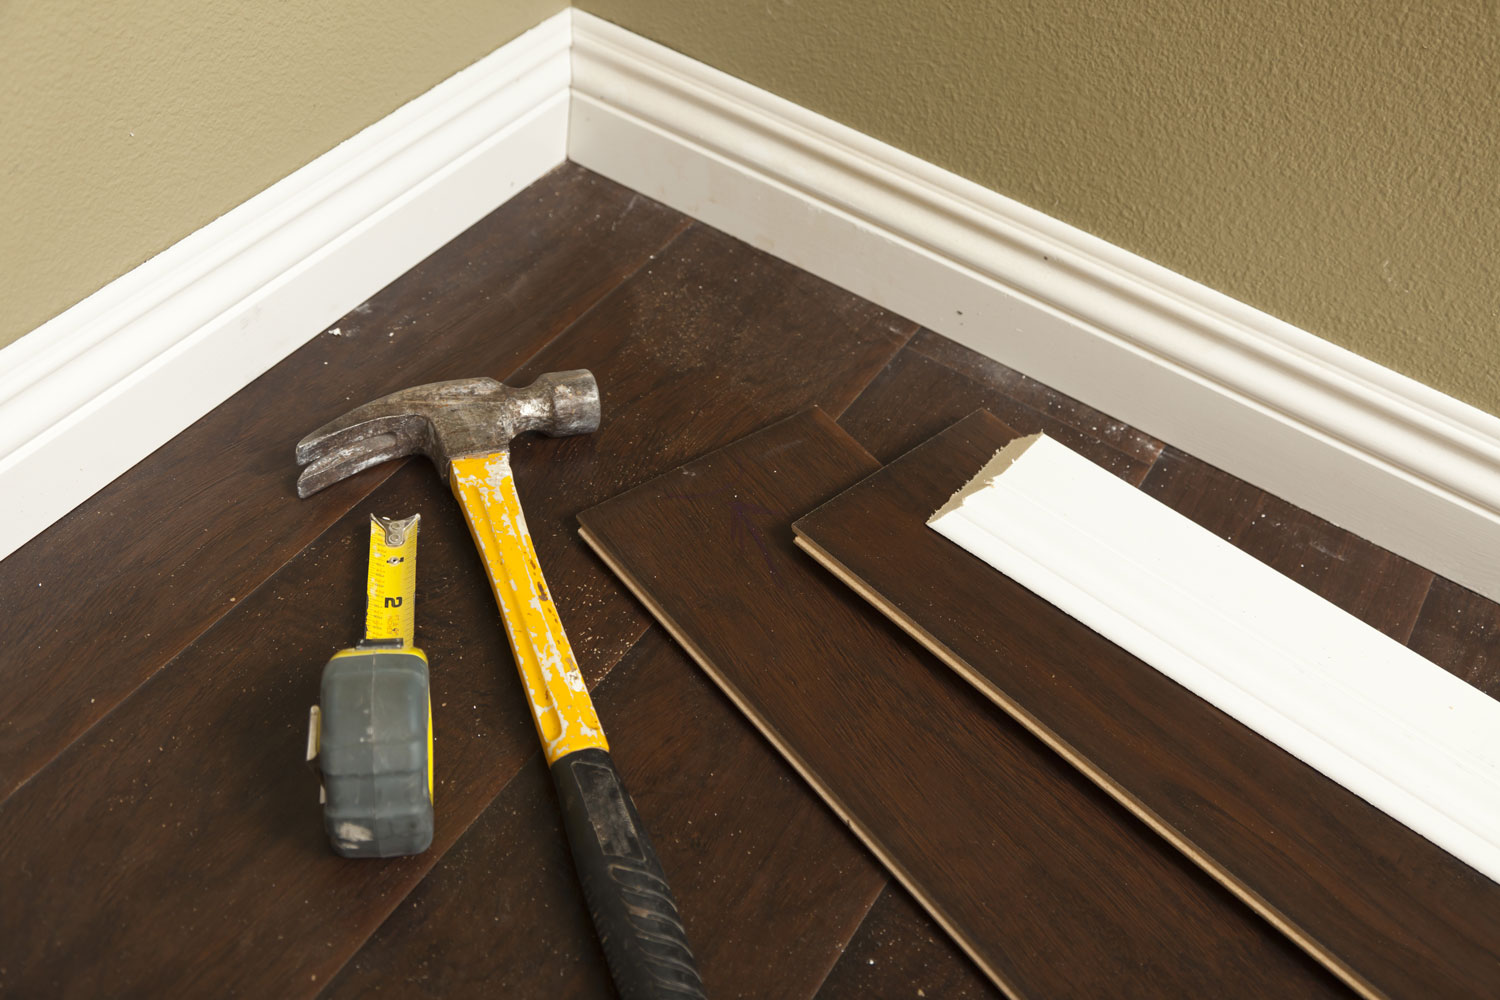 Construction equipment's used for installing baseboards